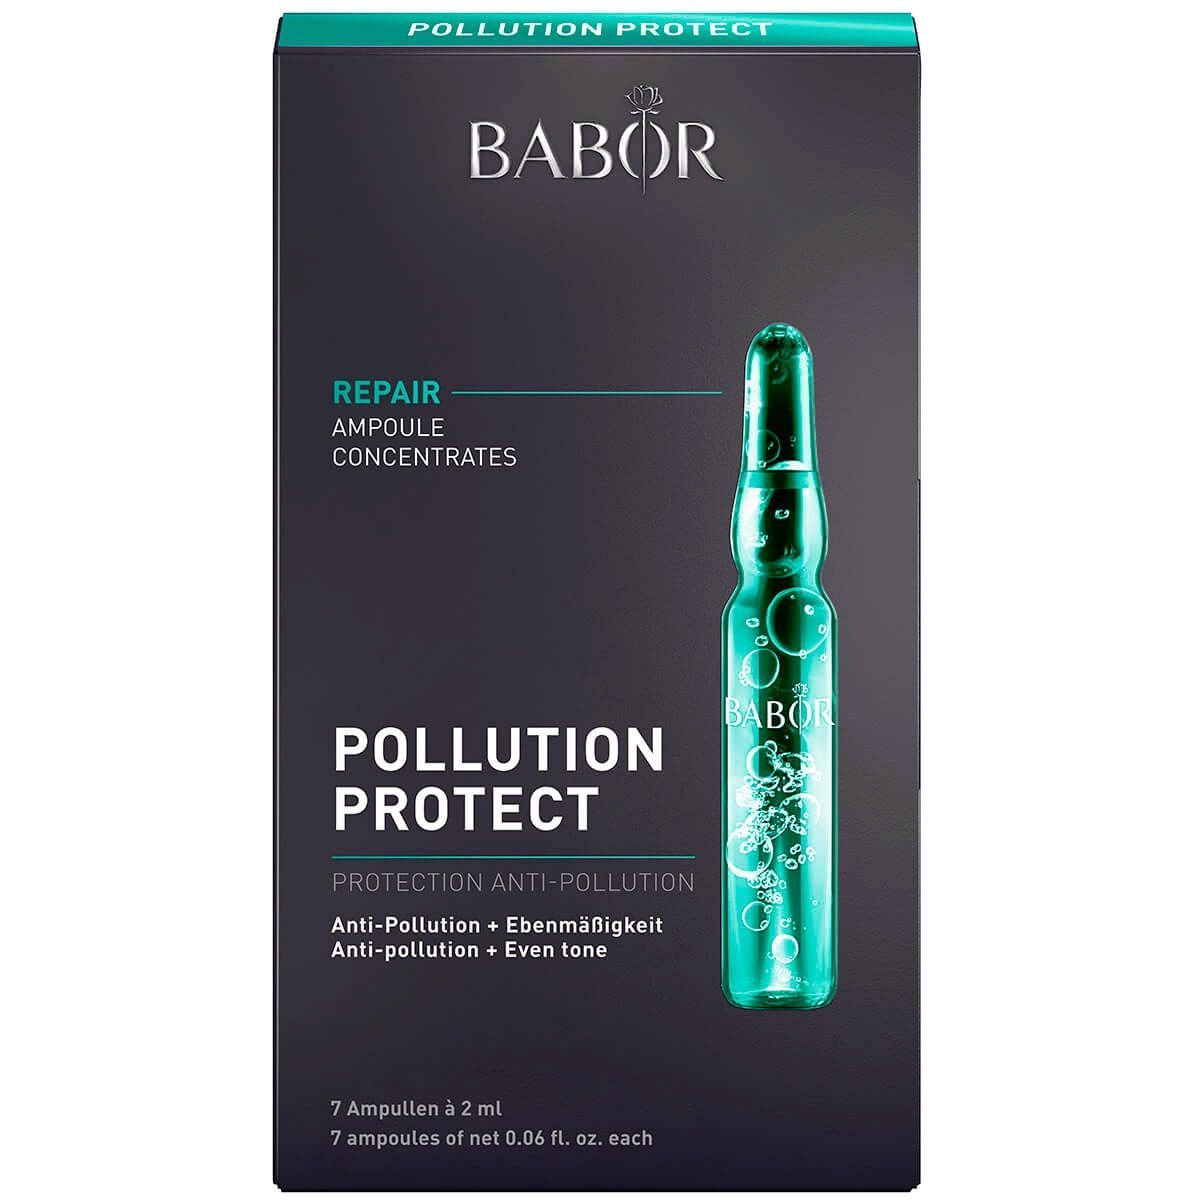 BABOR Pollution Protect Ampoule Concentrate